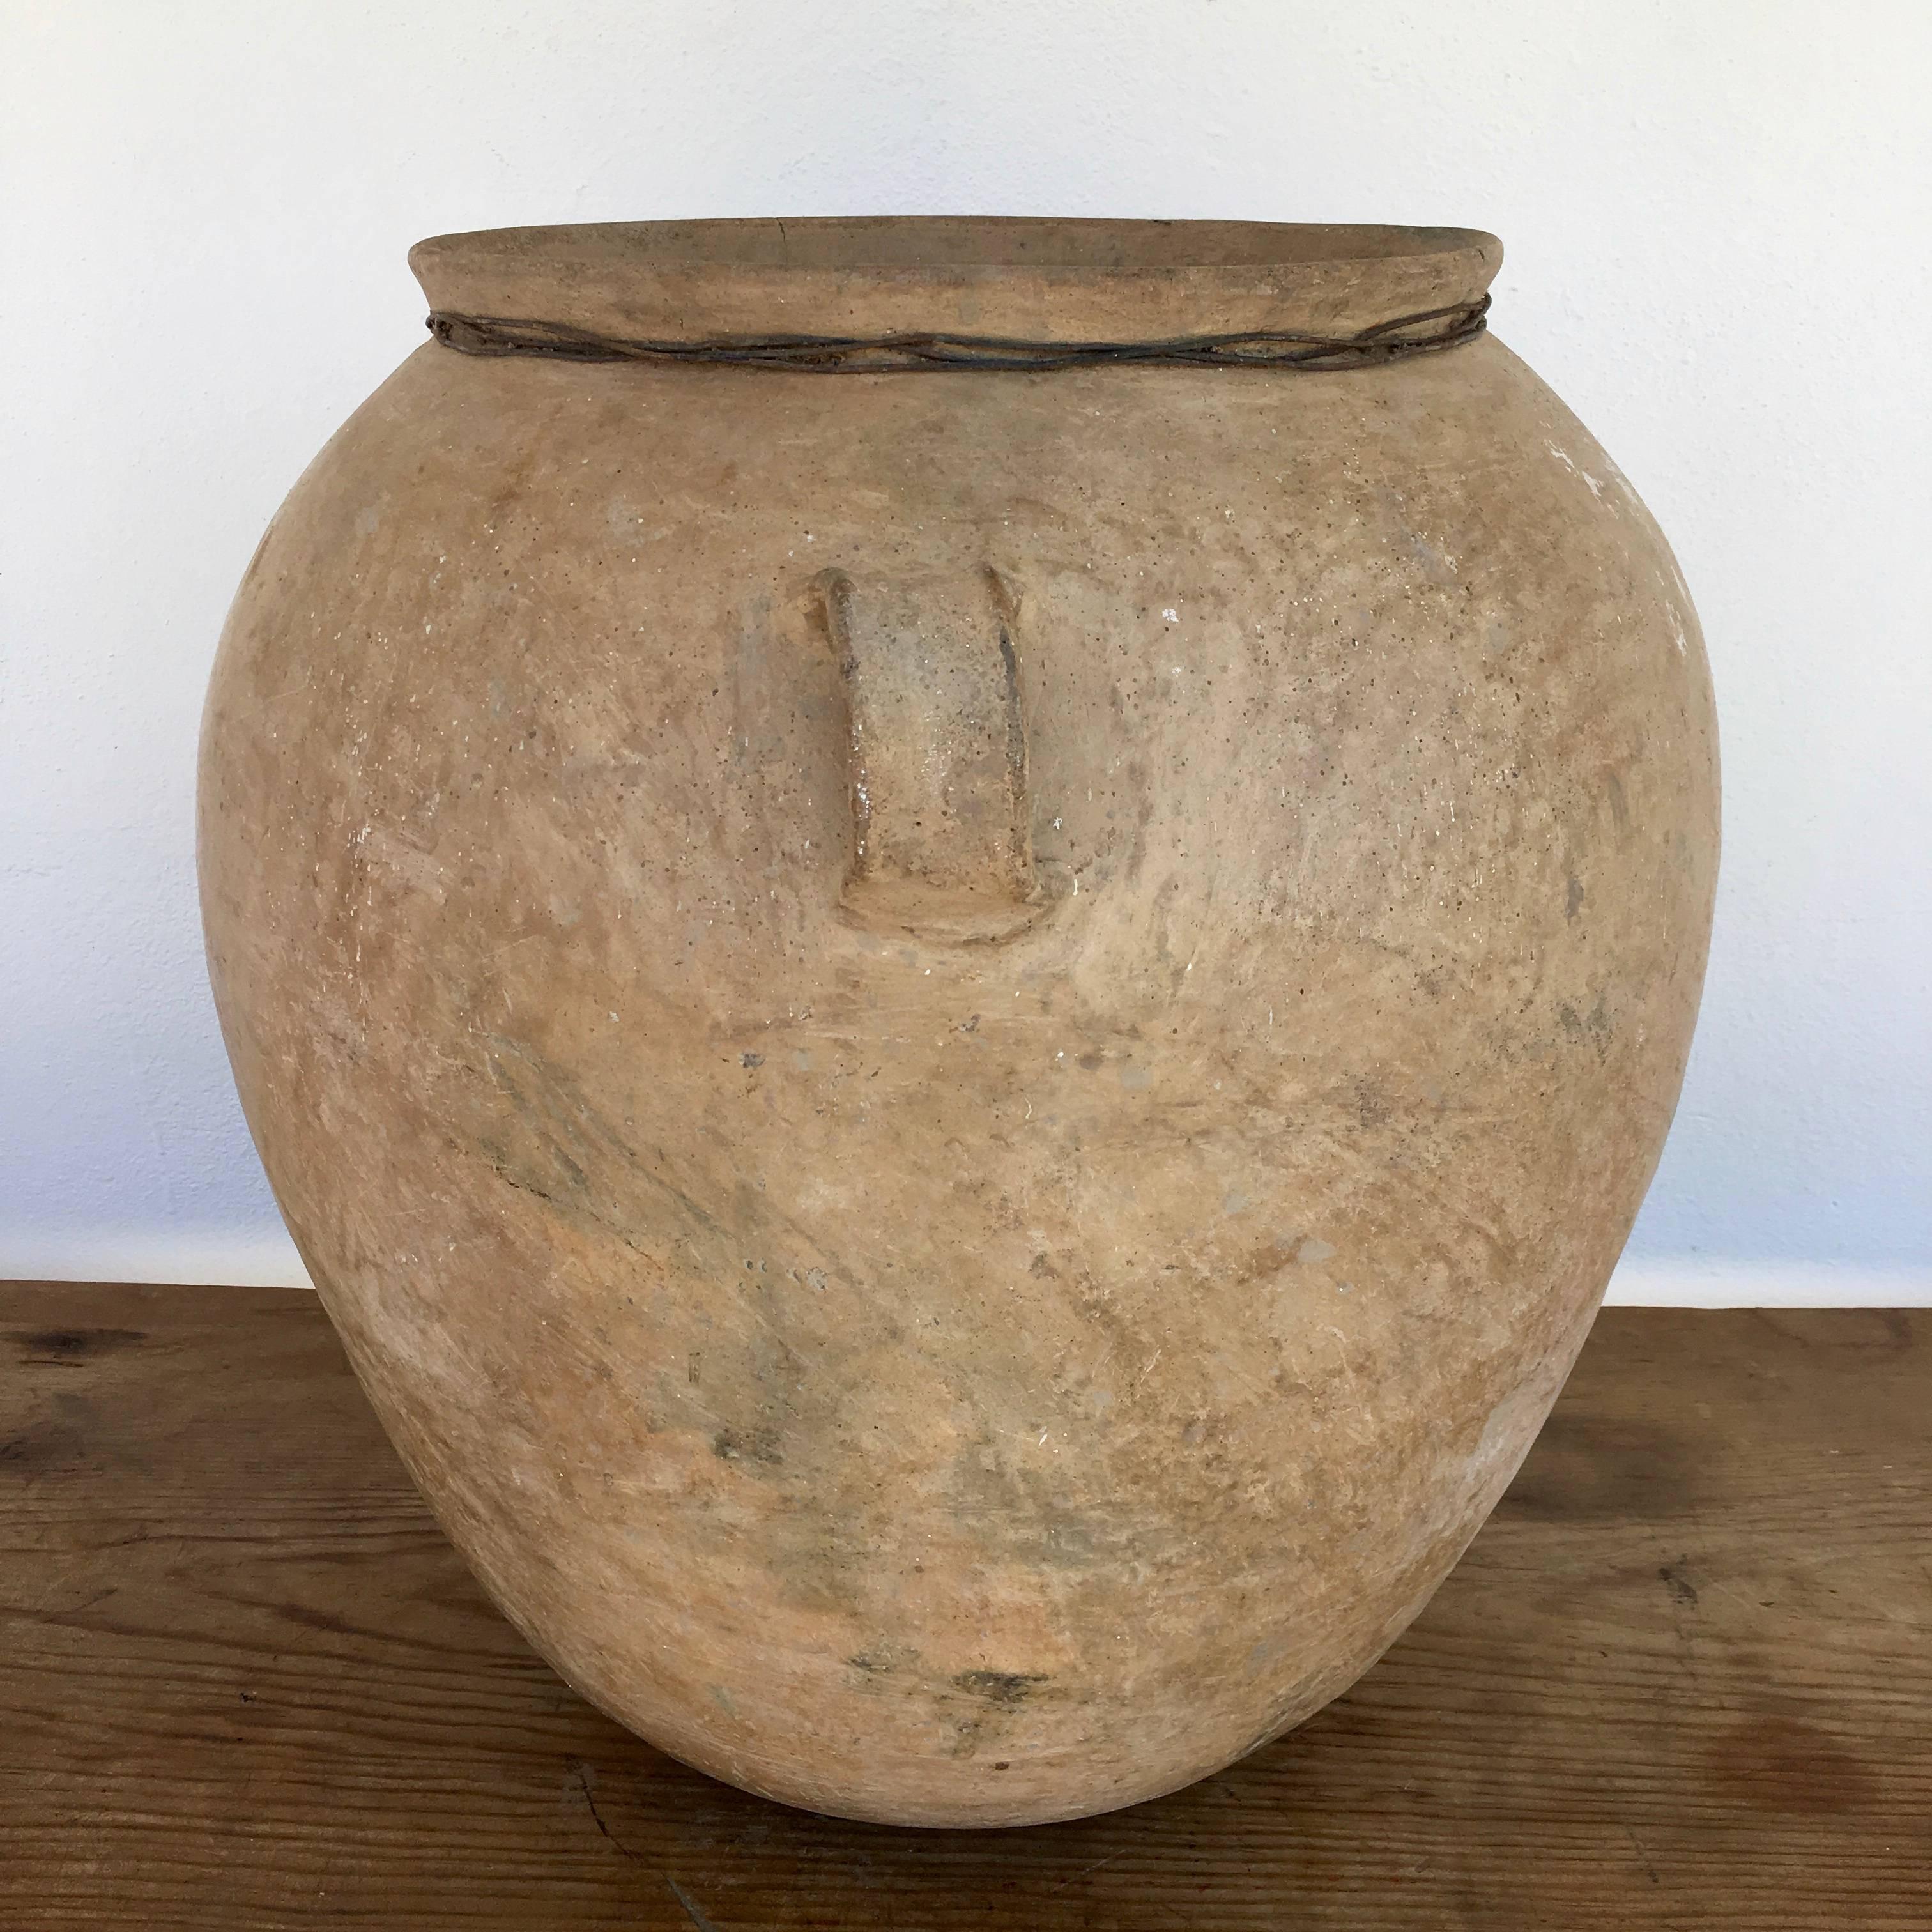 Smooth burnished patina. Large black fire mark on one side with smaller white markings on one face. Beautifully elaborated 1970s water vessel from the Popoloca cultural region of Puebla. The rural and remote communities that once practiced this art